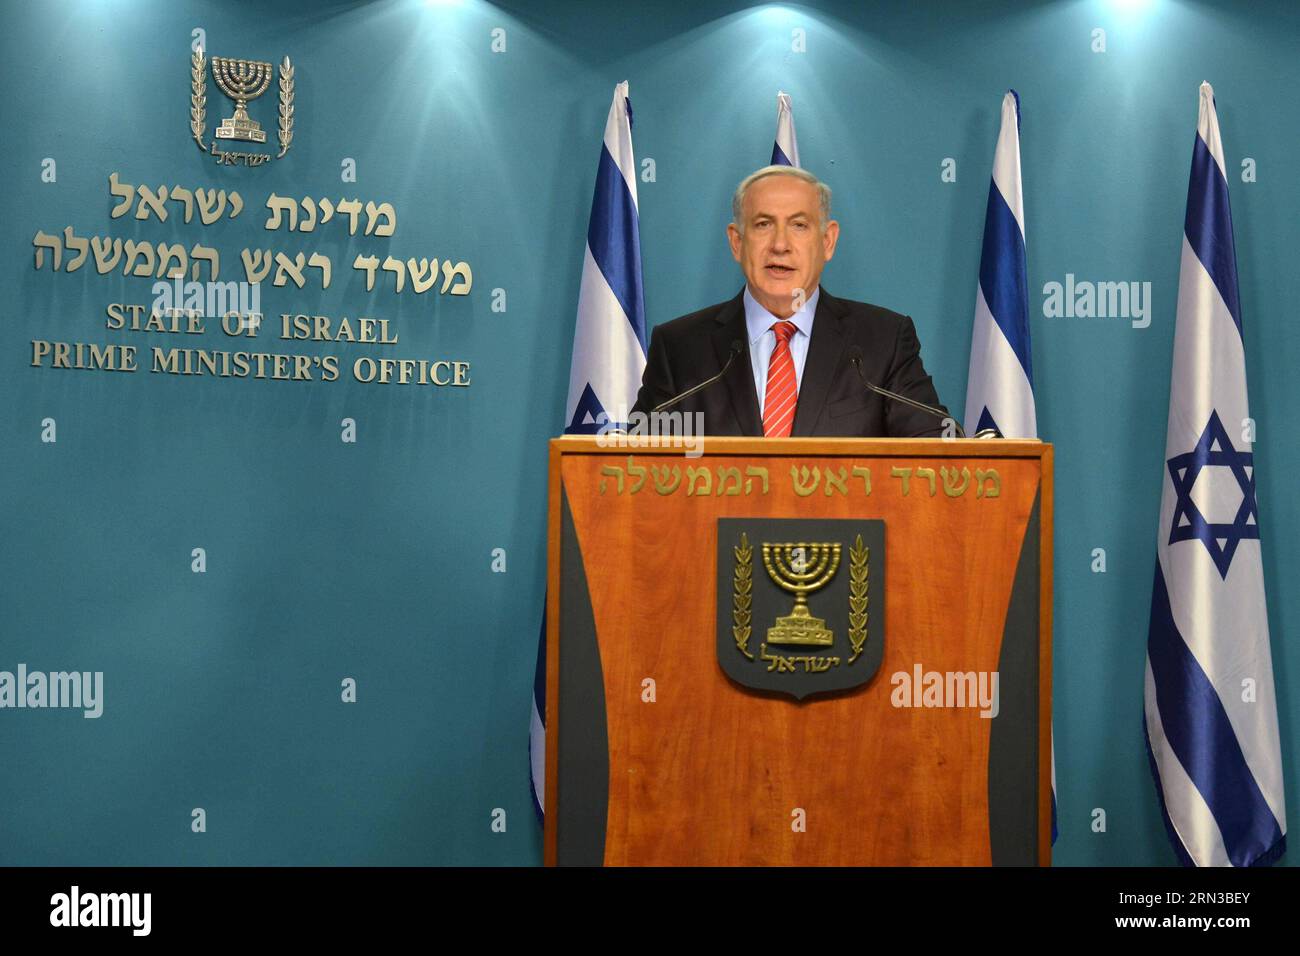 (150412) -- JERUSALEM, April 12, 2015 -- Israeli Prime Minister Benjamin Netanyahu delivers a statement to the press at the Prime Minister s office in Jerusalem, on April 12, 2015. Israeli Prime Minister Benjamin Netanyahu urged on Sunday the international community to reach a better deal with Iran, saying that Iran needs a deal more than anyone. GPO/) MIDEAST-JERUSALEM-ISRAEL-PM-IRAN-NUCLEAR DEAL-PRESS CONFERENCE KobixGideon PUBLICATIONxNOTxINxCHN   Jerusalem April 12 2015 Israeli Prime Ministers Benjamin Netanyahu delivers a Statement to The Press AT The Prime Ministers S Office in Jerusalem Stock Photo